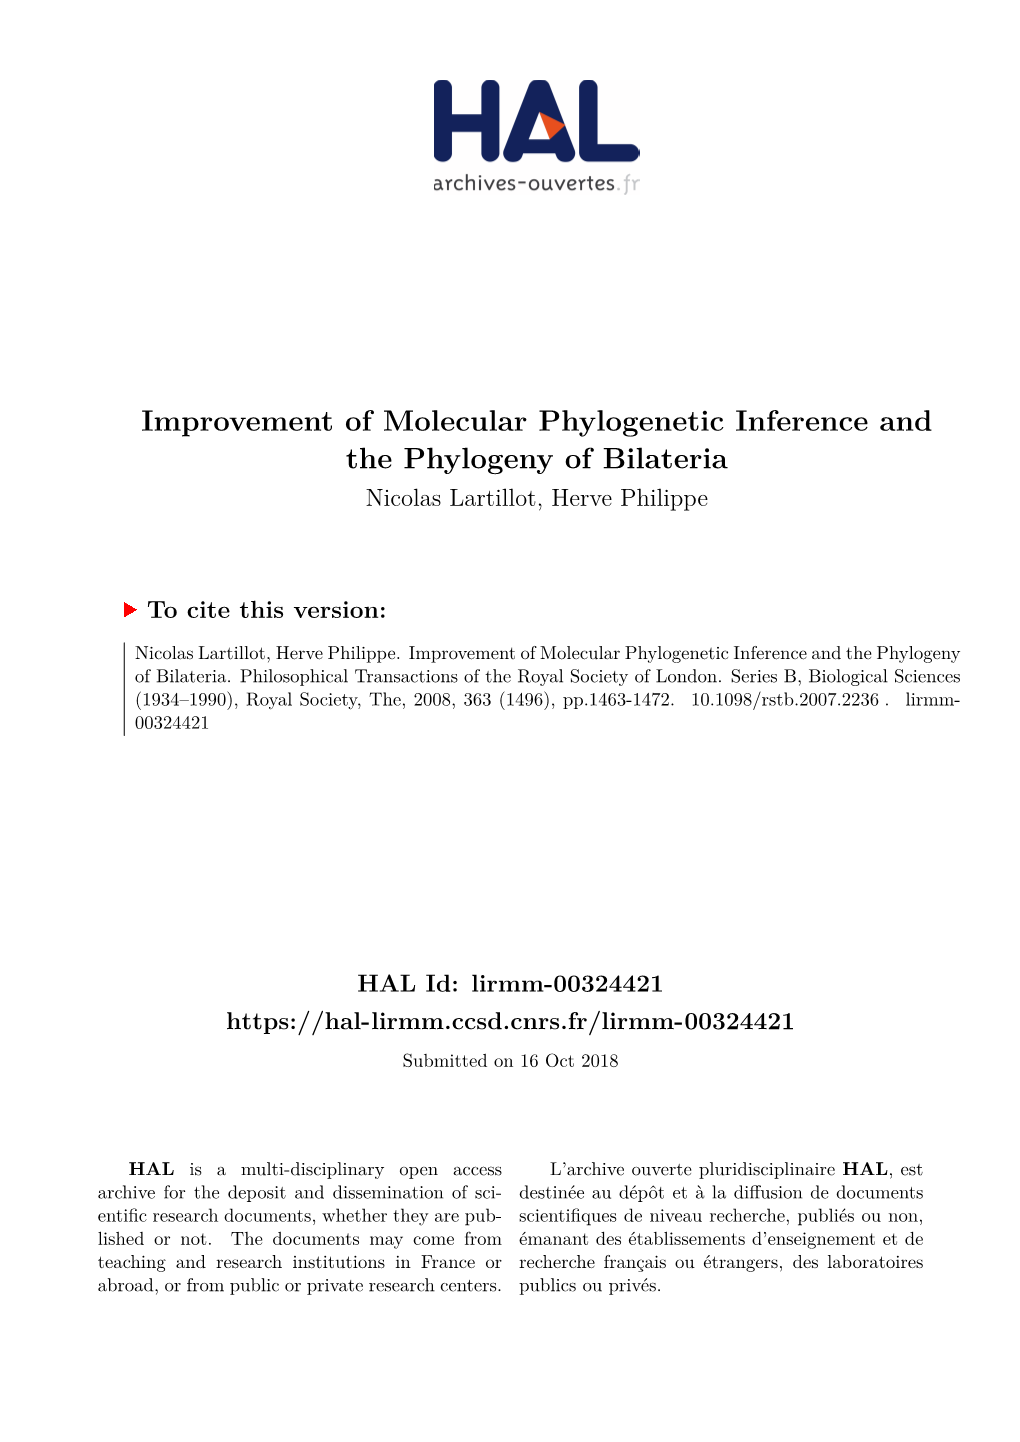 Improvement of Molecular Phylogenetic Inference and the Phylogeny of Bilateria Nicolas Lartillot, Herve Philippe